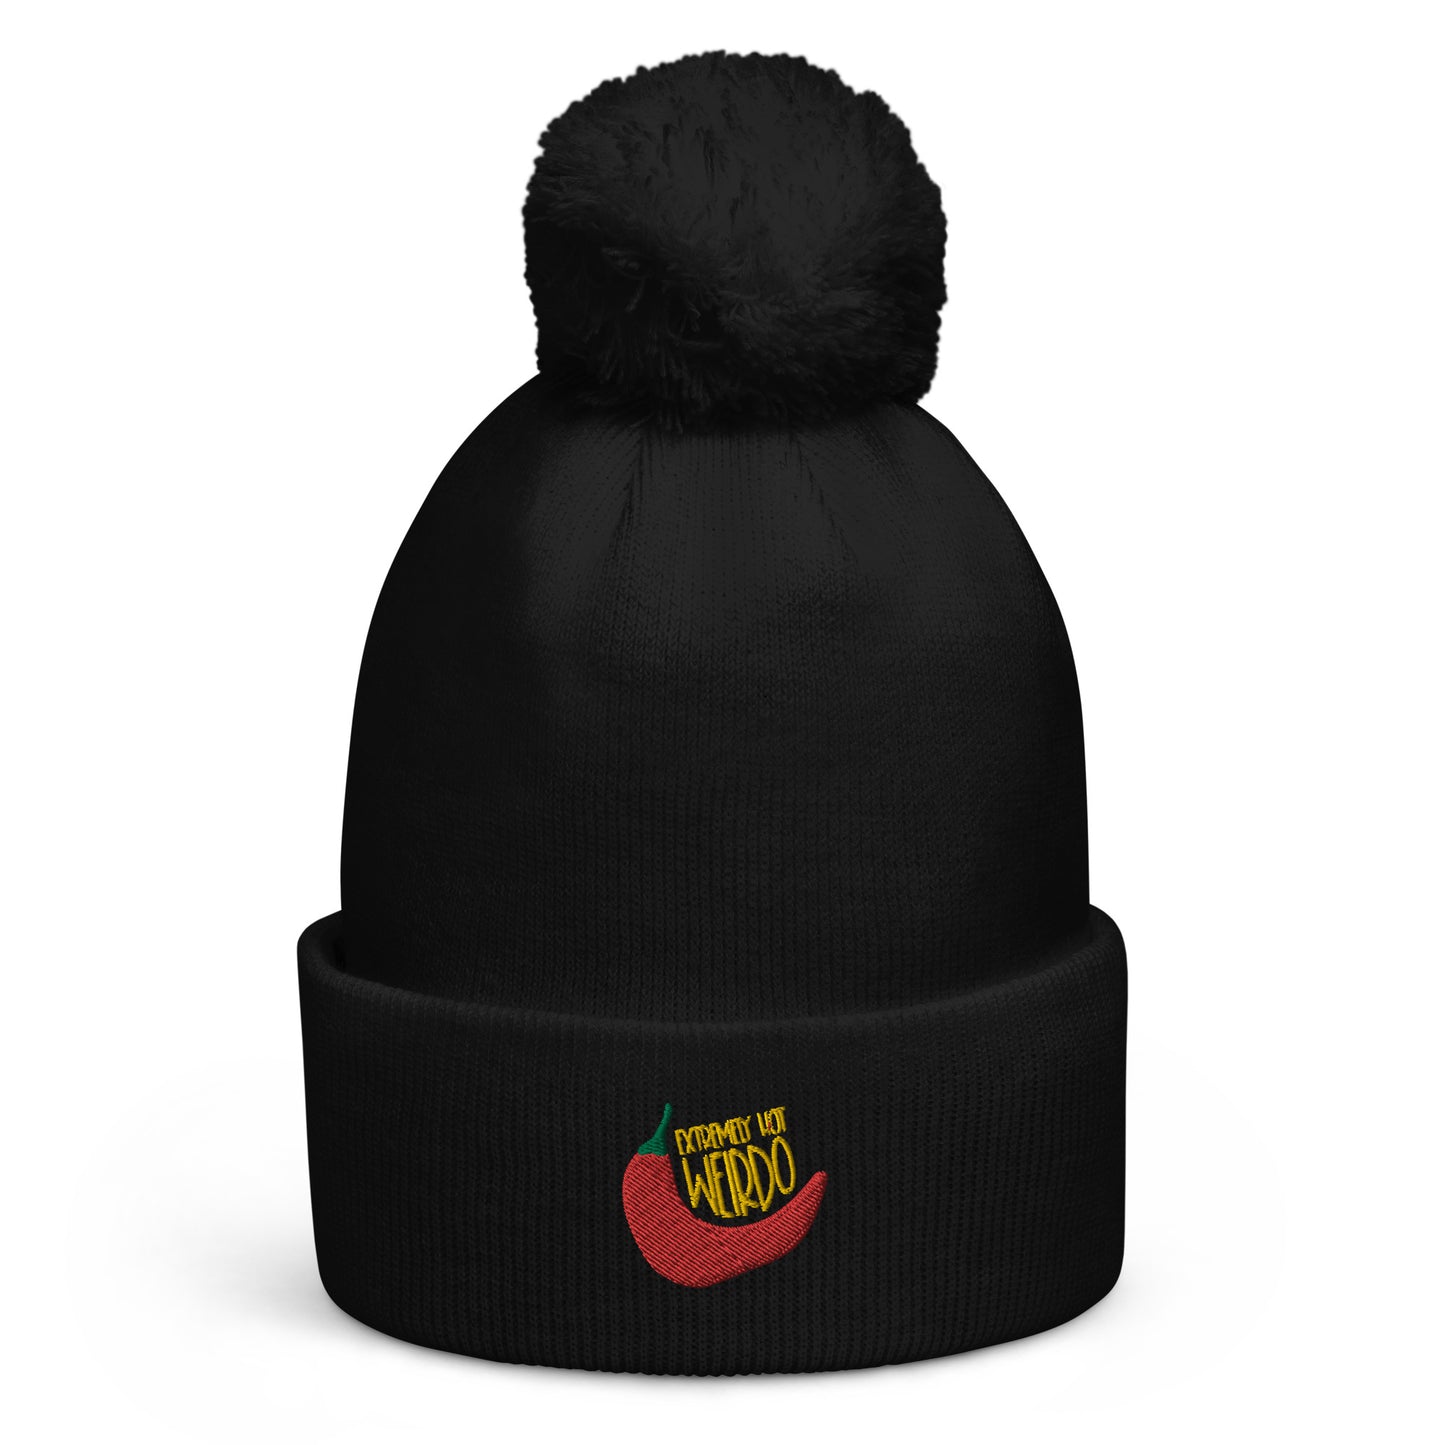 #WEIRDO | This beanie with pom pom has the Extremely Hot Weirdo fun meme embroidered at the front of the beanie with pom pom. This beanie hat is for weird people only!